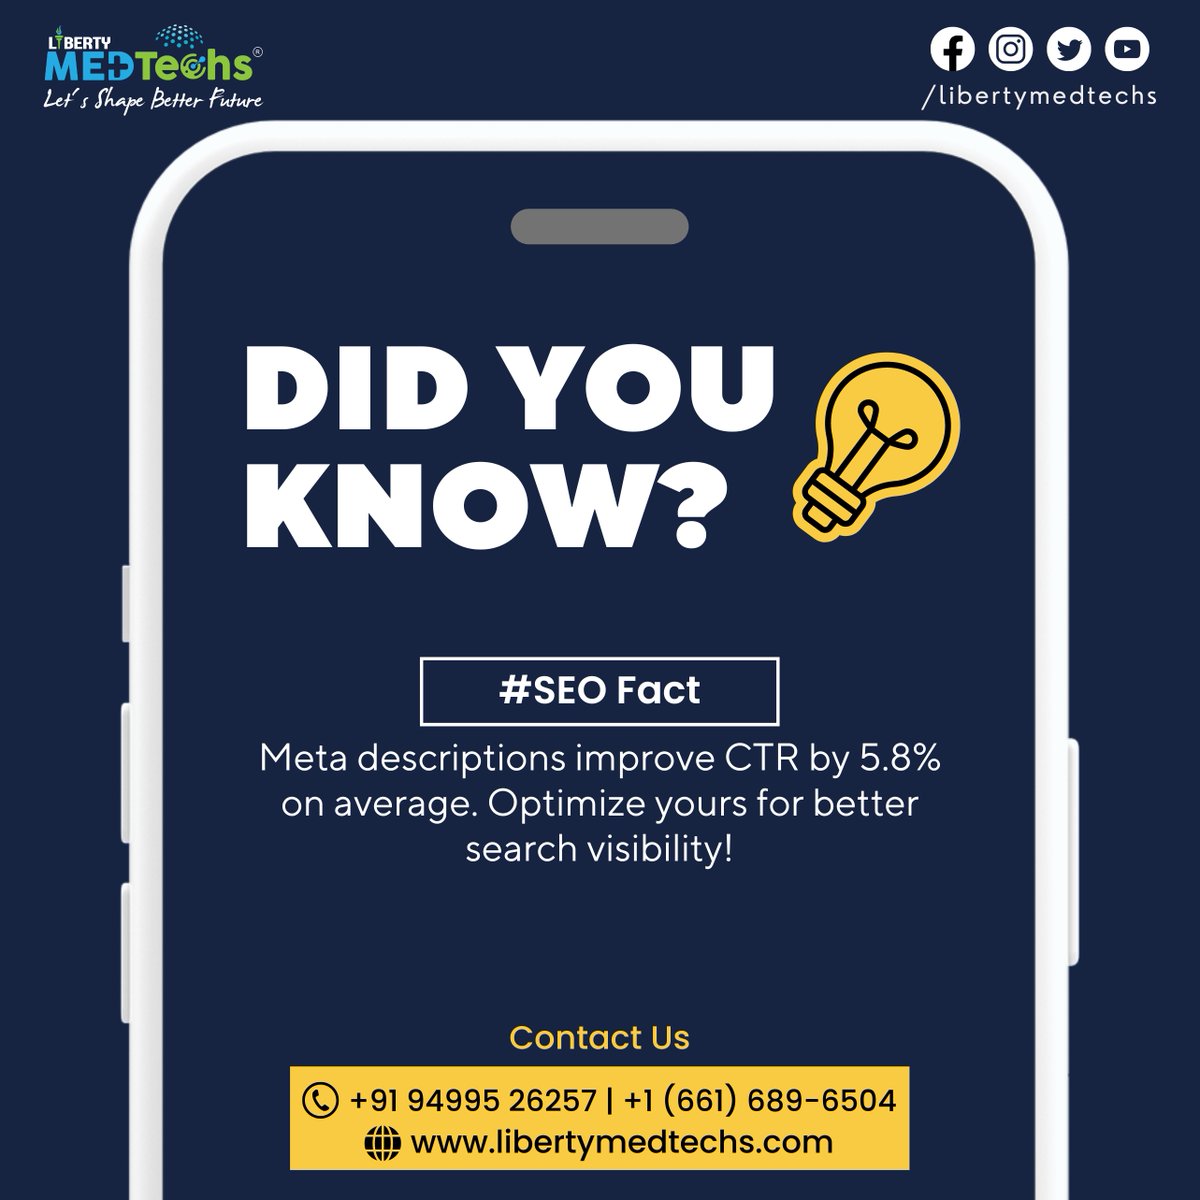 Did you know this?

Reach Us today
Call : +91 94995 26257 | +1 (661) 689-6504
Visit : libertymedtechs.com

#seo #MetaDescriptions #metadescription #SearchVisibility #CTRBoost #digitalmarketing #optimizationtips #DidYouKnow #marketing #seostrategy #seoservices #libertymedtechs